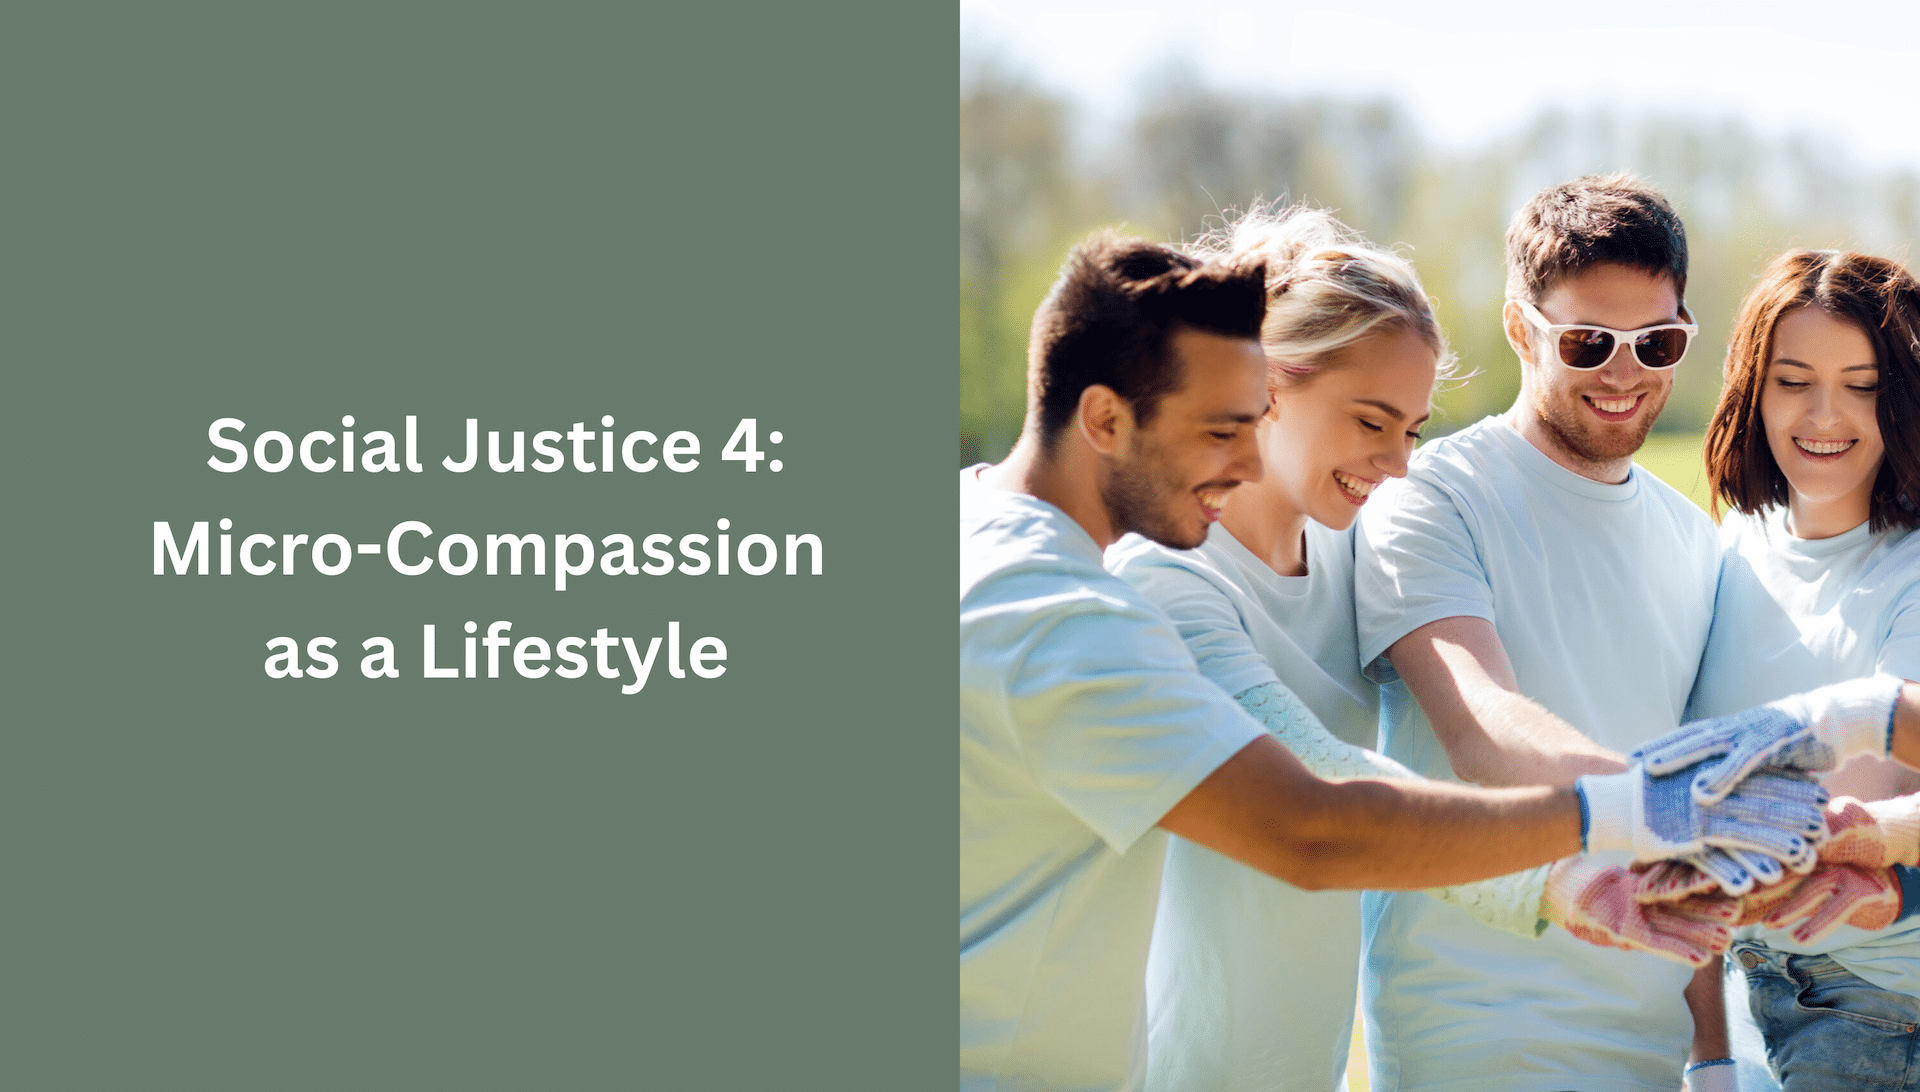 Social justice 4: Micro-compassion as a lifestyle